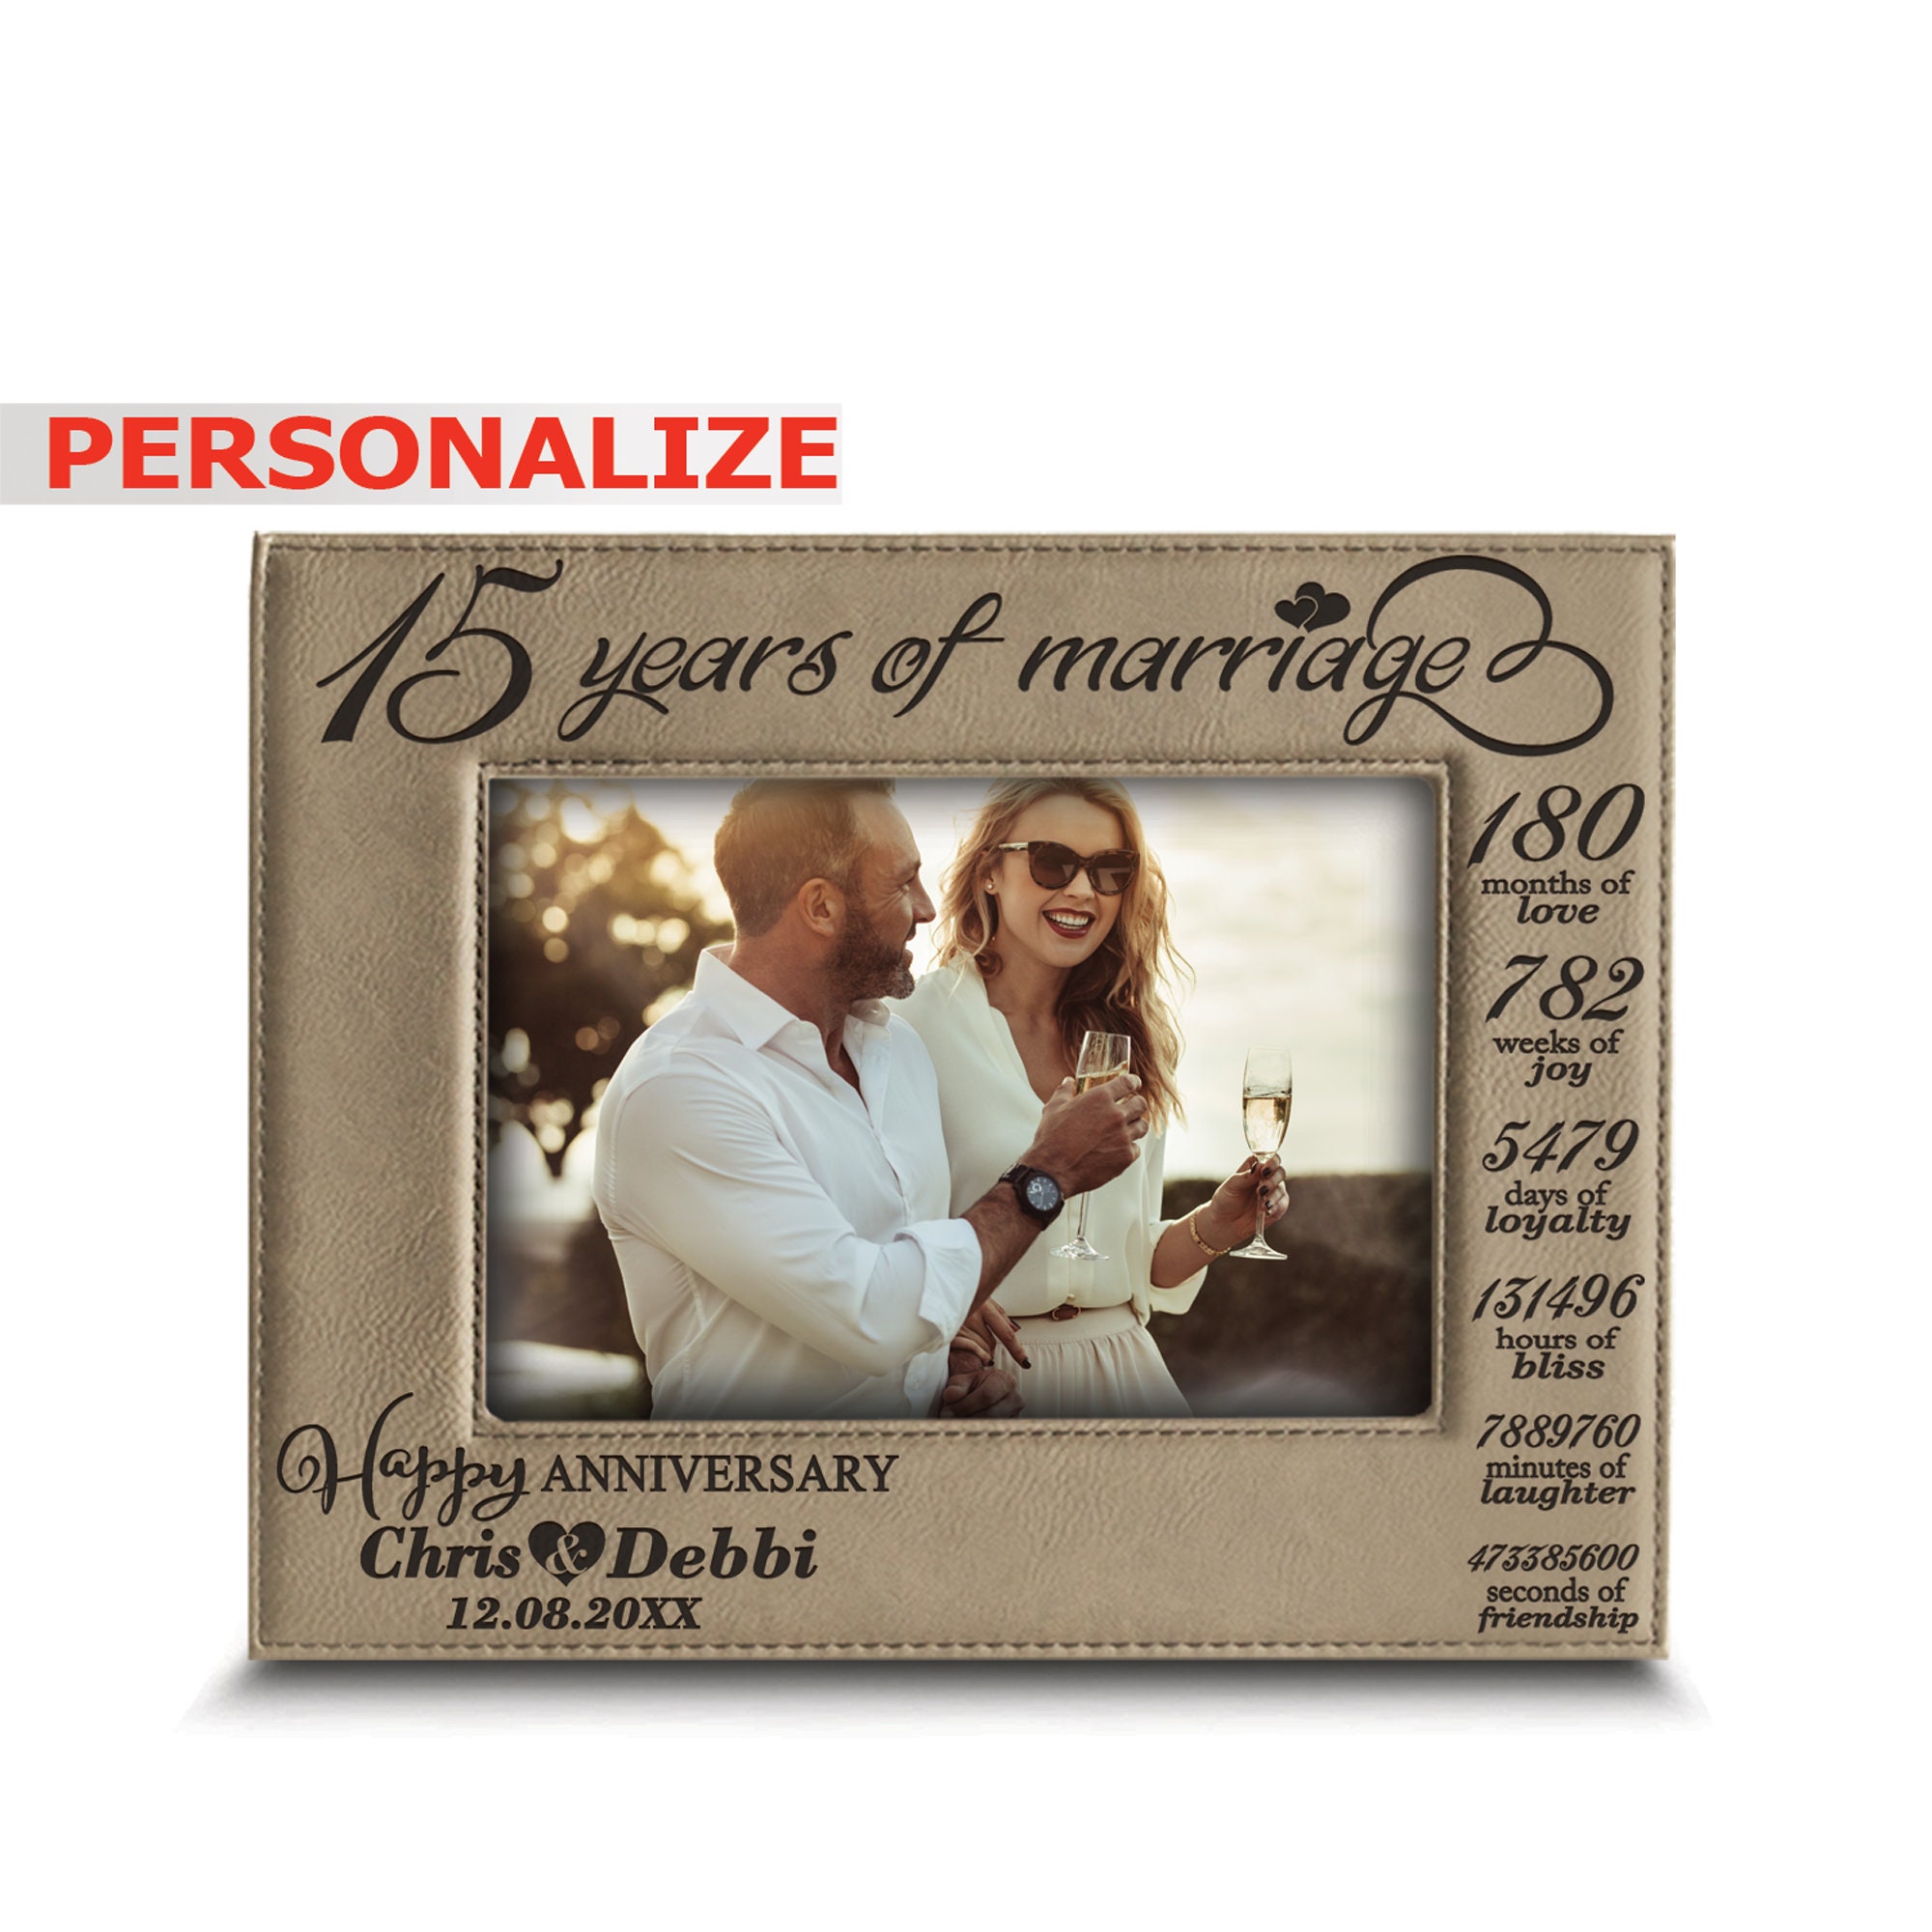 PERSONALIZED-15 Years of Marriage-months Weeks Days Hours